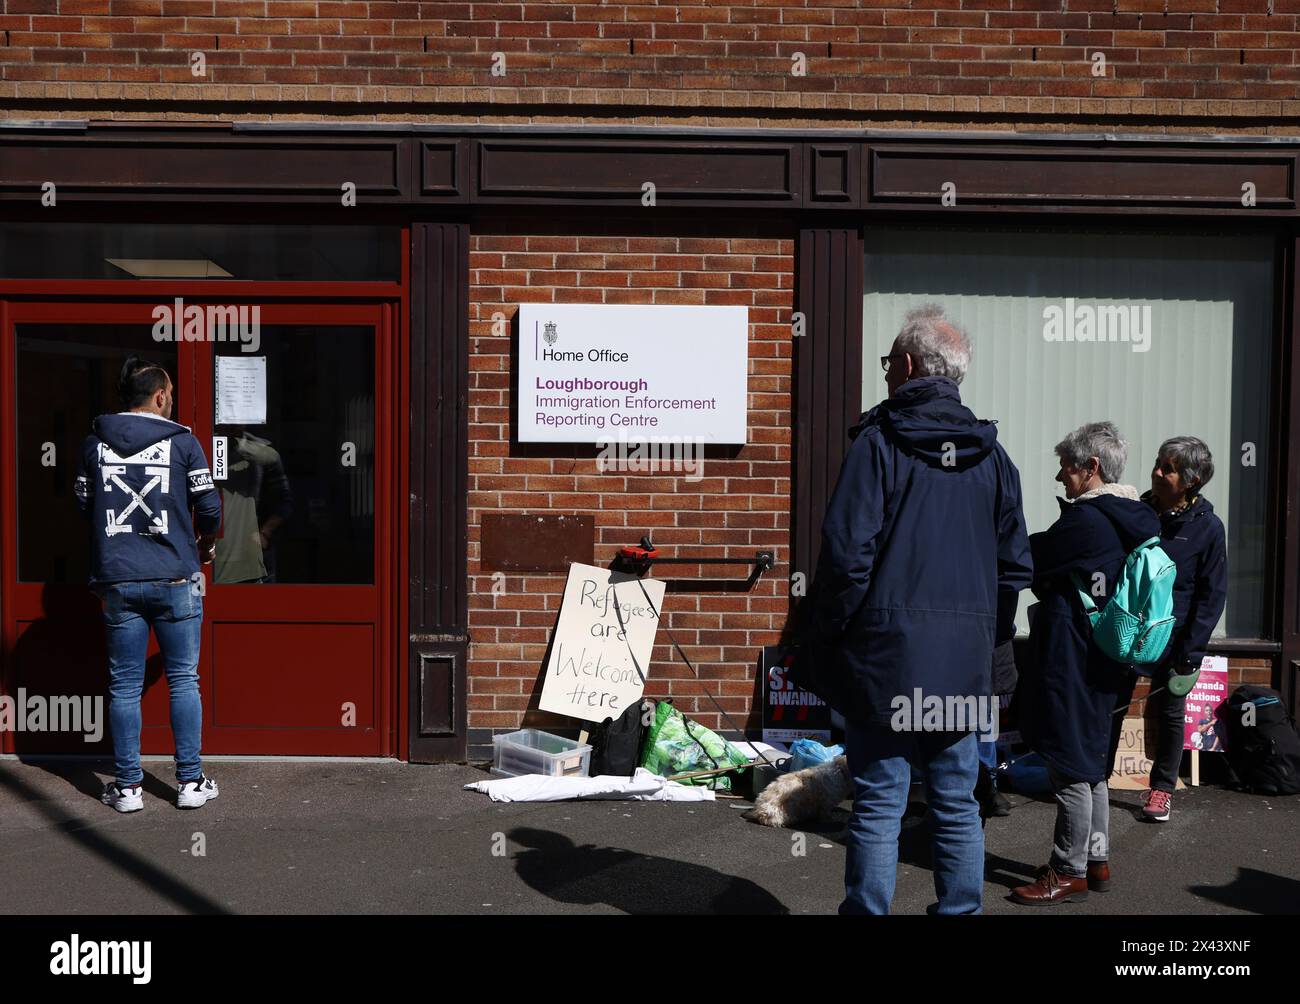 Loughborough, Leicestershire, UK. 30th April 2024. A man waits to enter an Immigration Enforcement Reporting Centre as demonstrators protest against planned deportation of migrants and refugees to Rwanda.  Credit Darren Staples/Alamy Live News. Stock Photo